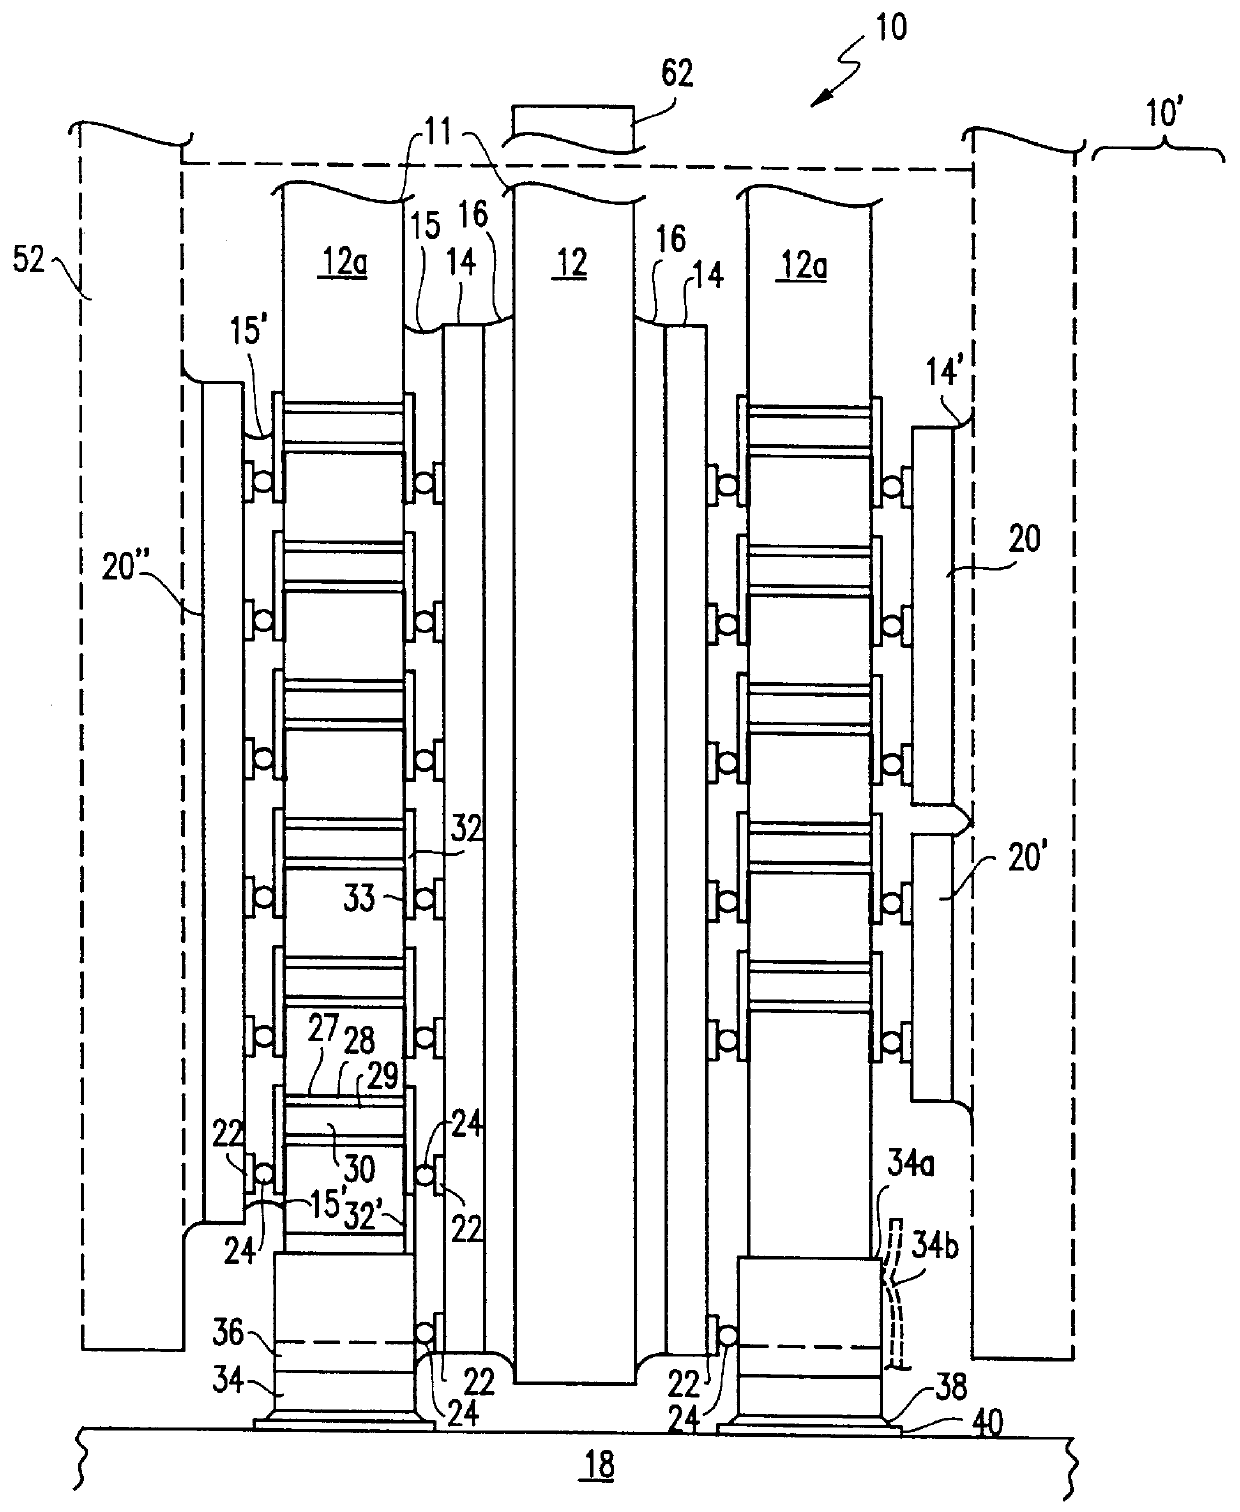 Integrated, multi-chip, thermally conductive packaging device and methodology